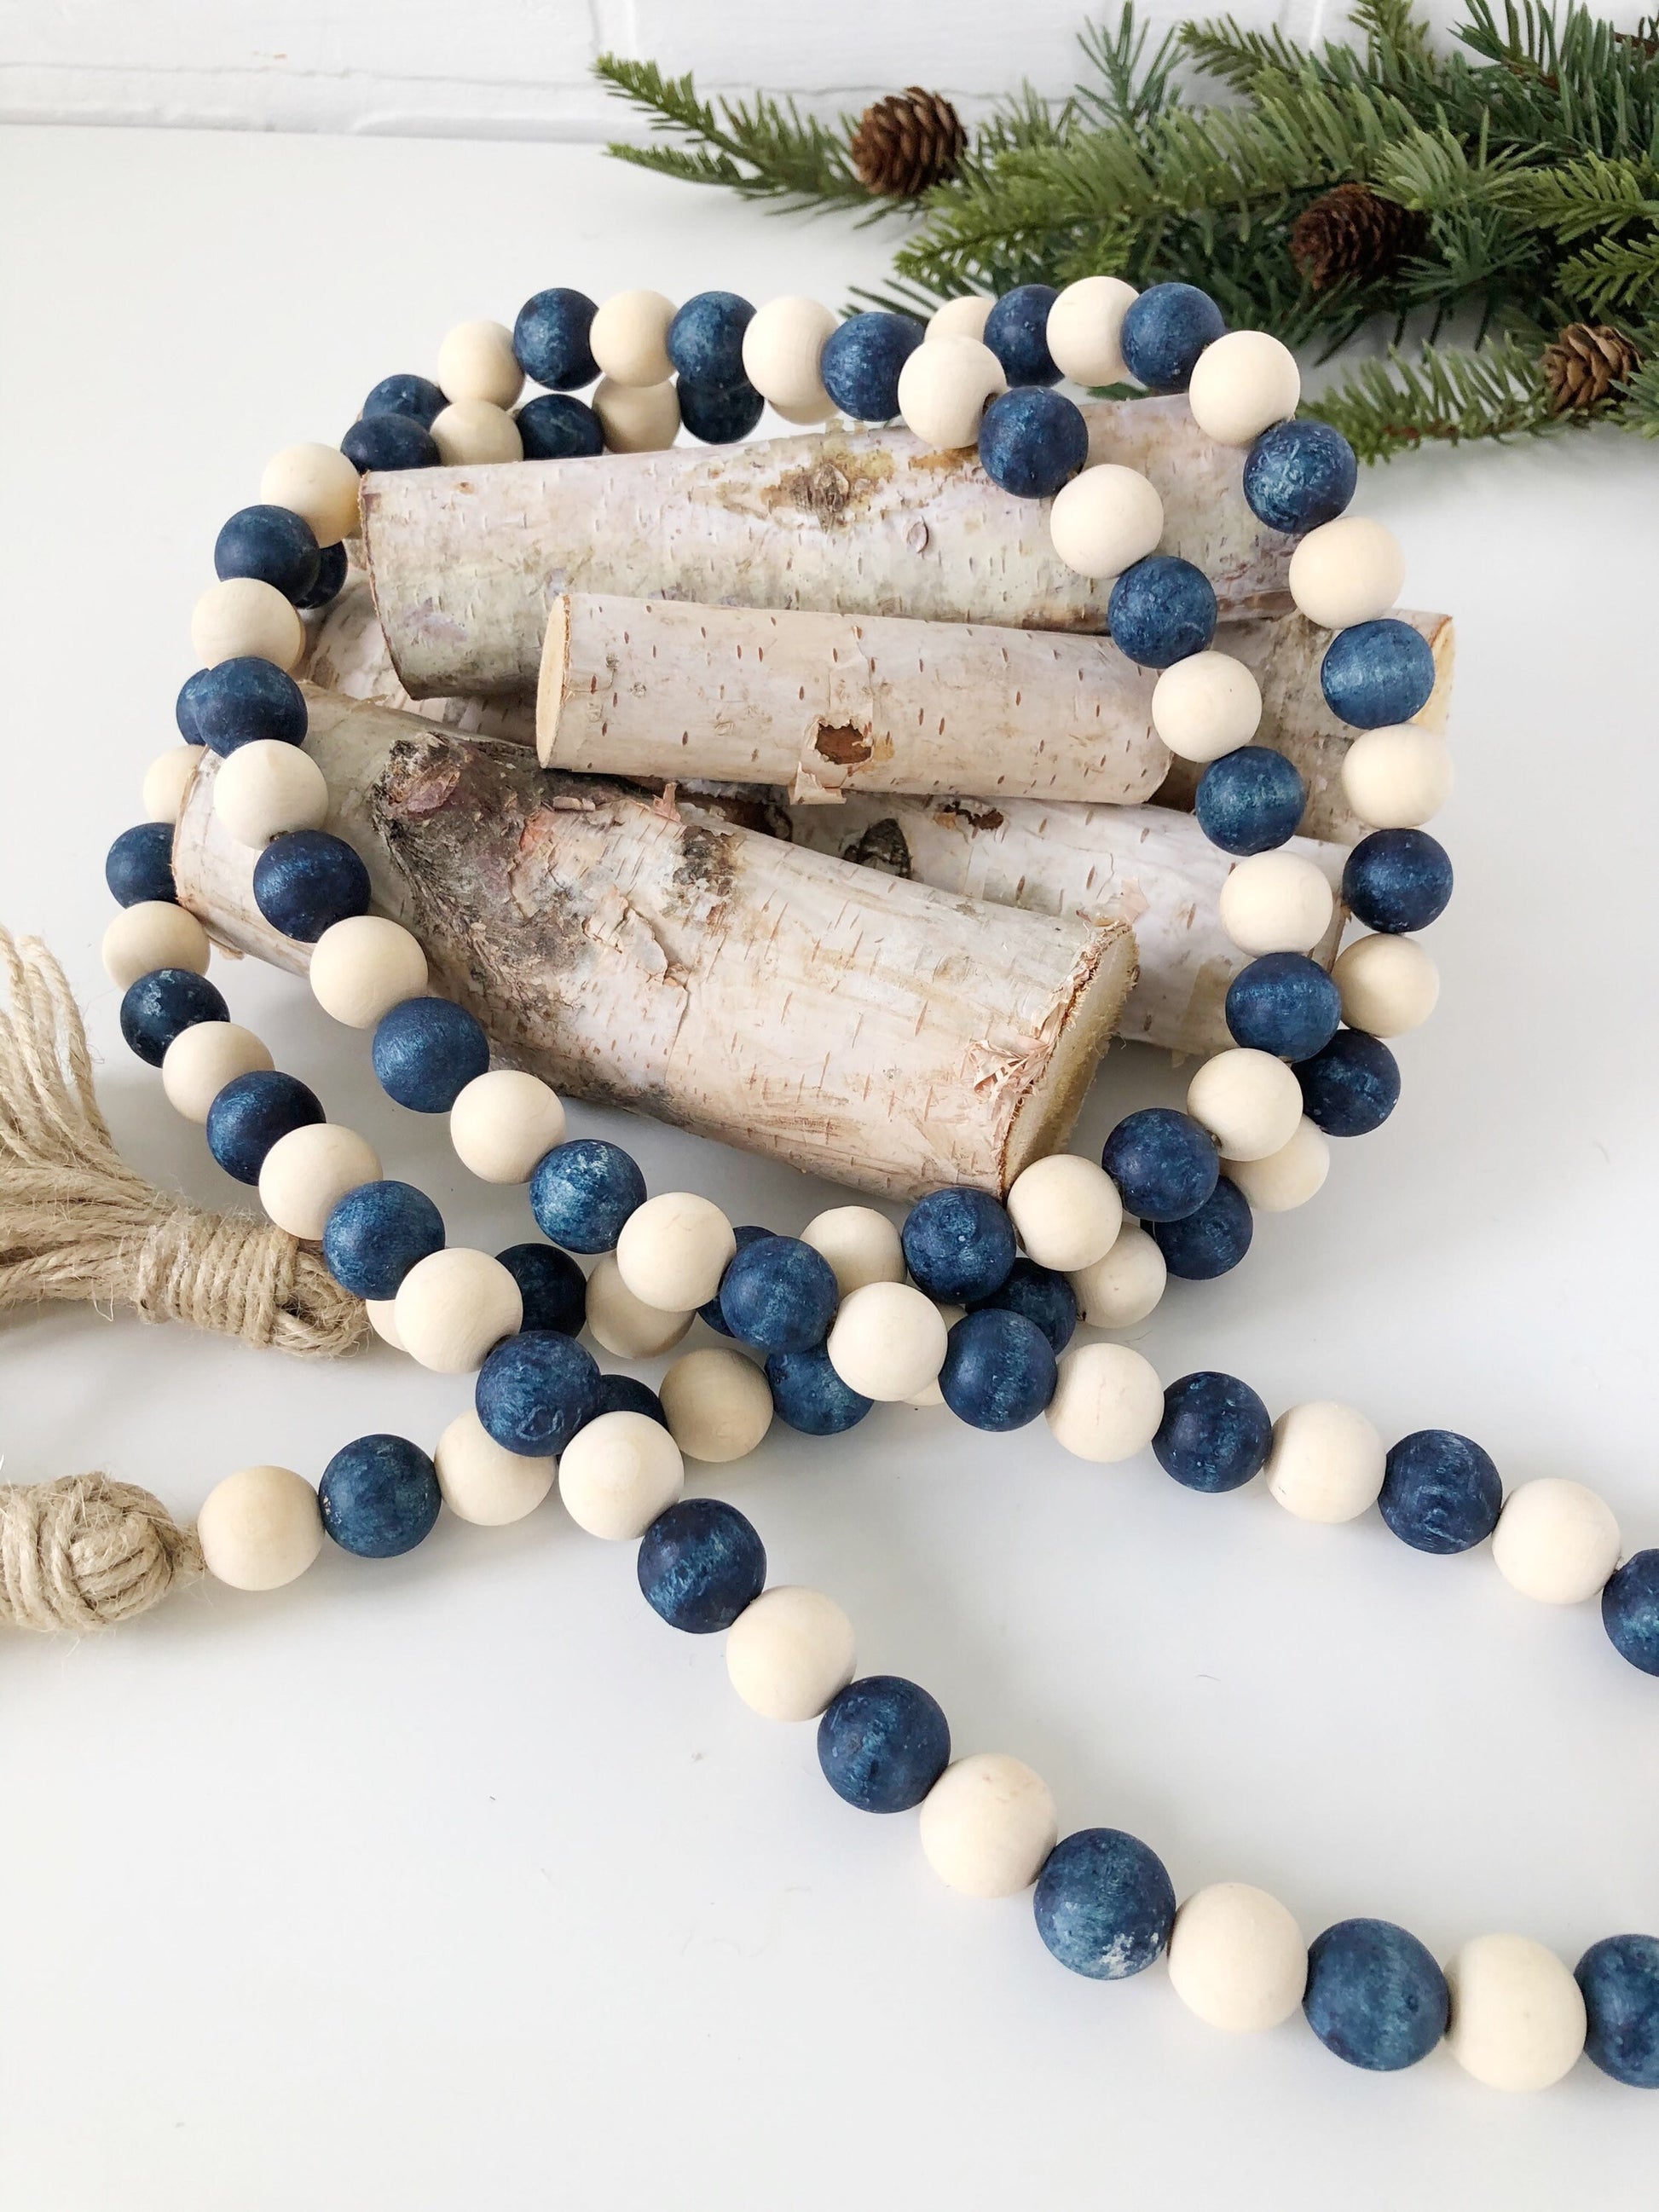 Buy Wooden Bead Garland for Coffee Table Decor, Denim Blue and